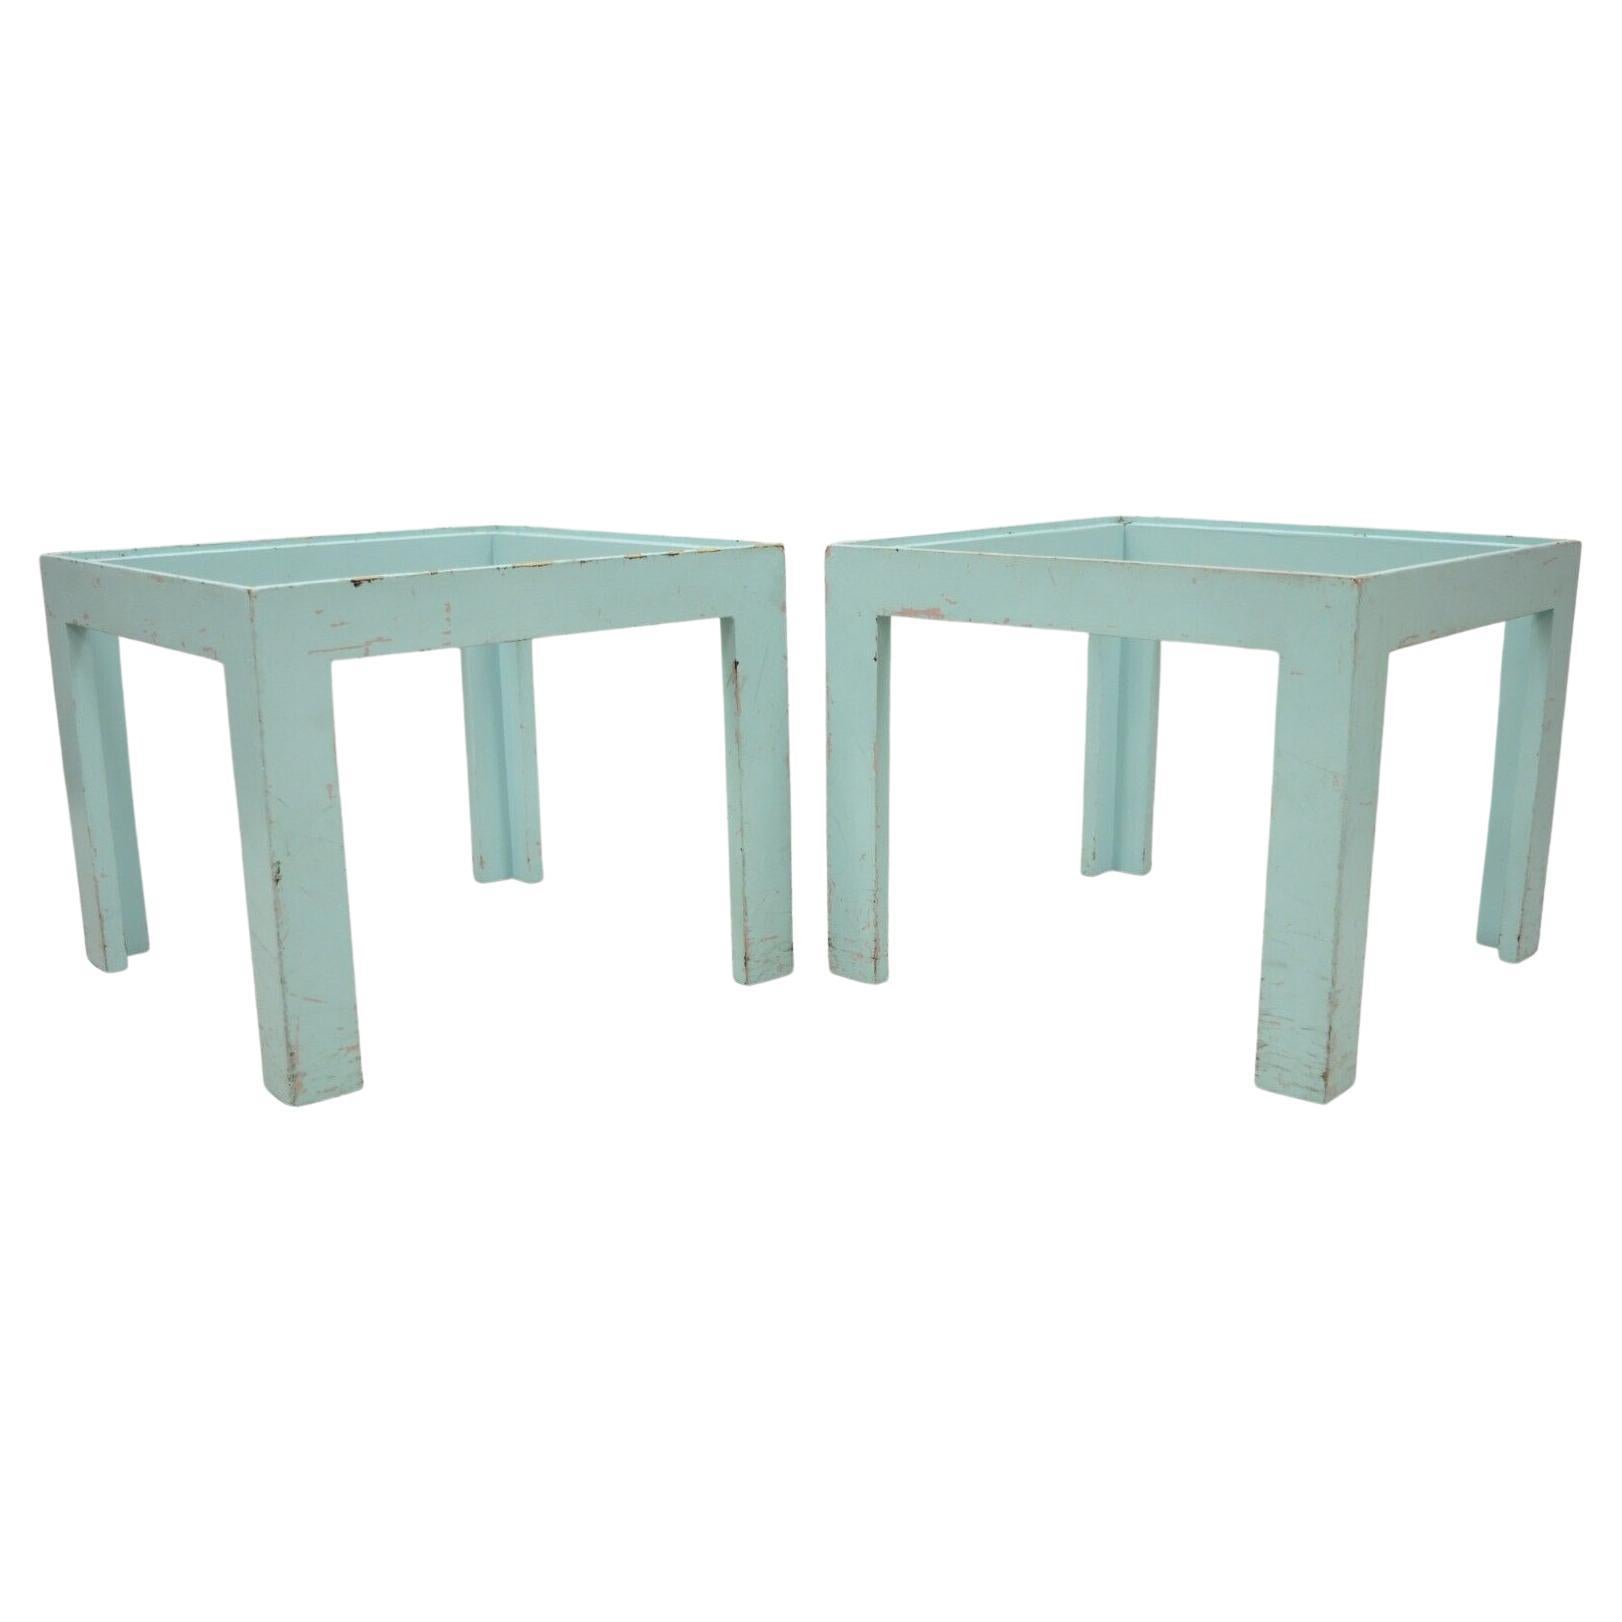 Vintage Mid-Century Modern Wooden Low Side End Table Blue Paint, a Pair For Sale